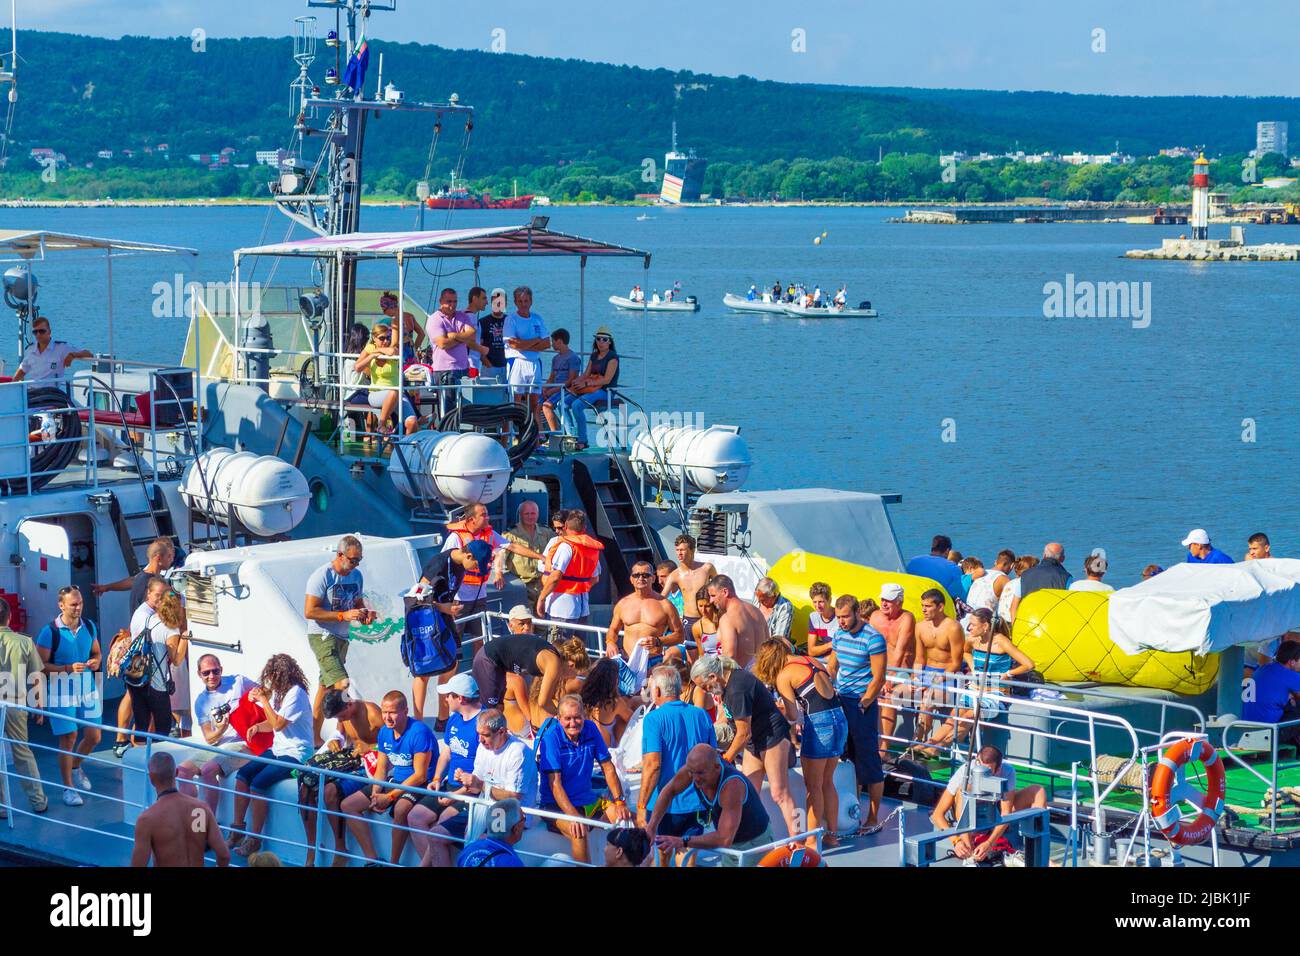 On August 2, 2015 was held 75th anniversary swimming marathon Galata - Varna. It involved 263 participants.The meeting place for the participants Stock Photo